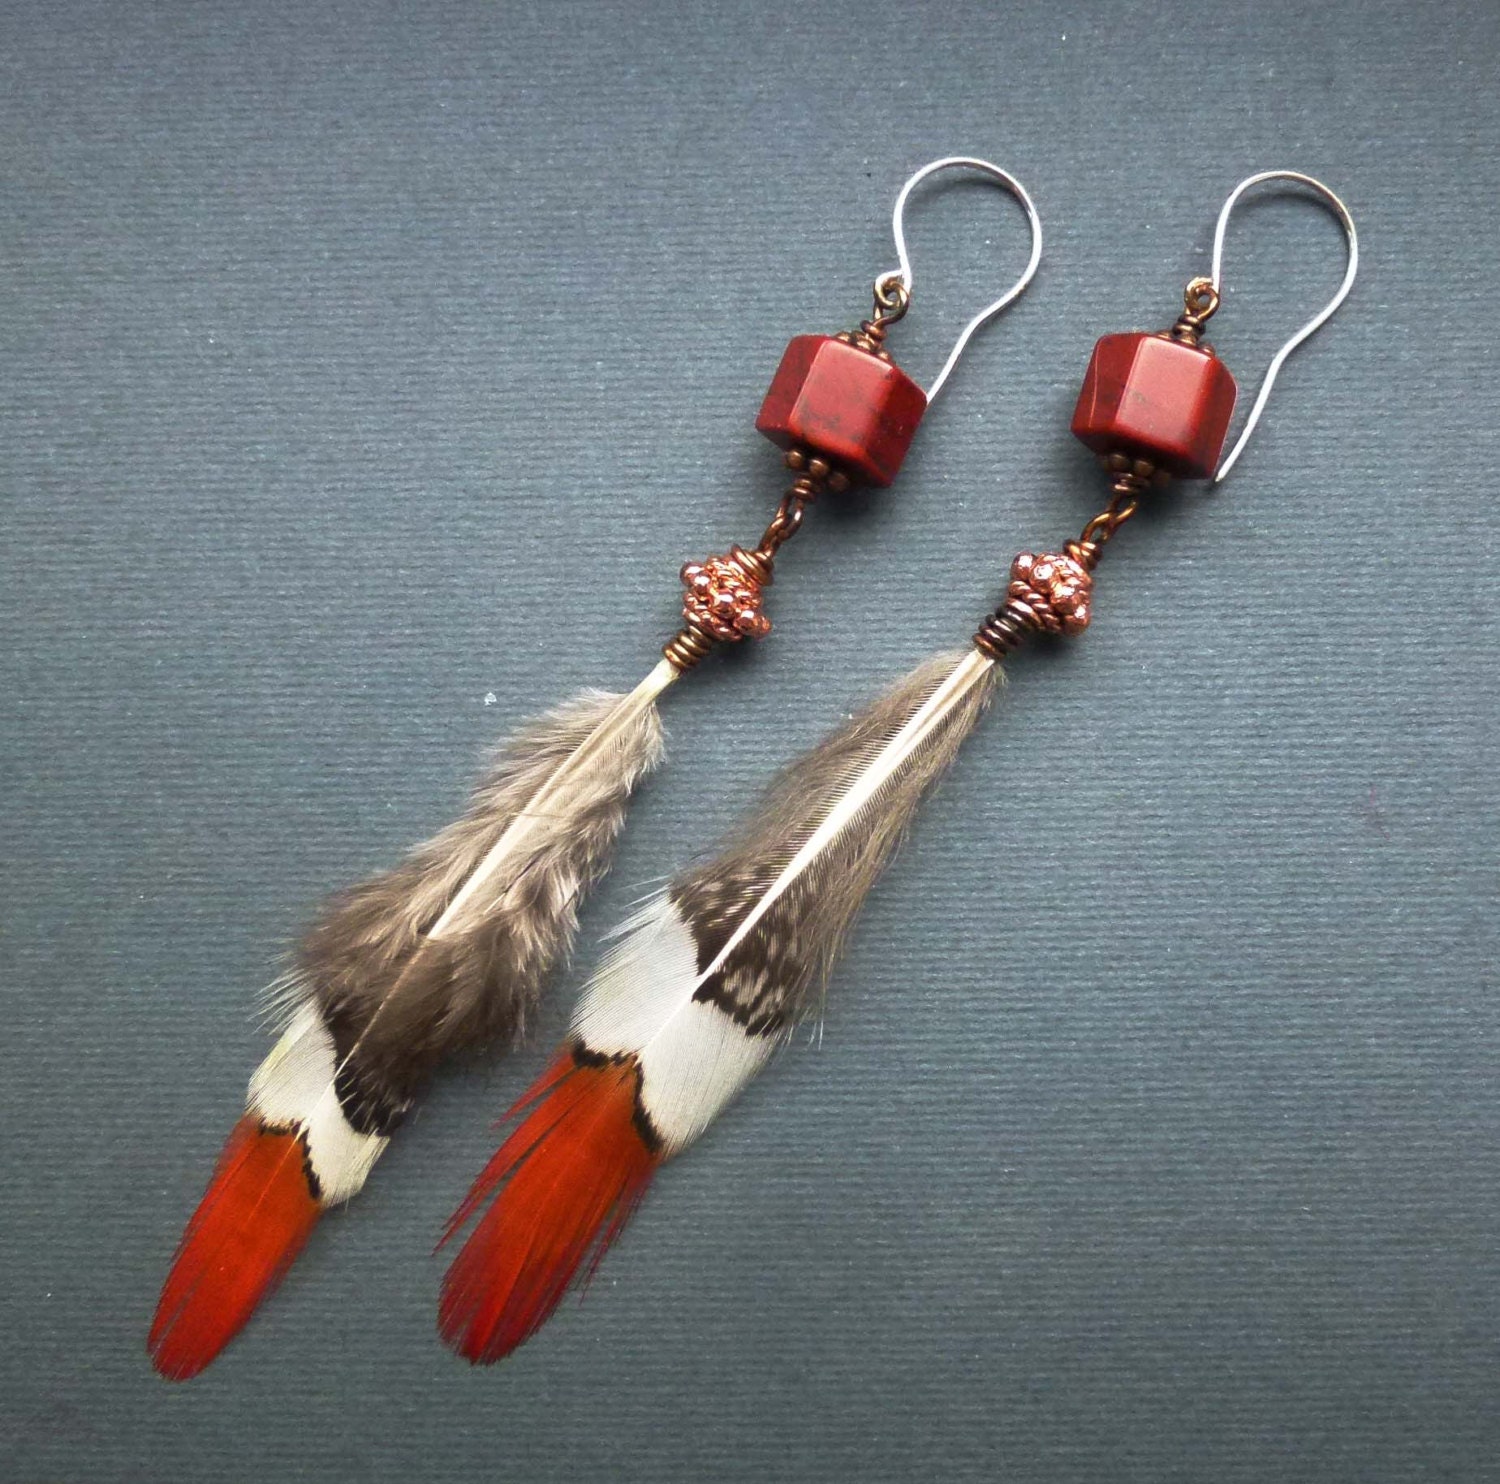 Extra long eco boho hippie real feather earrings / Peasant